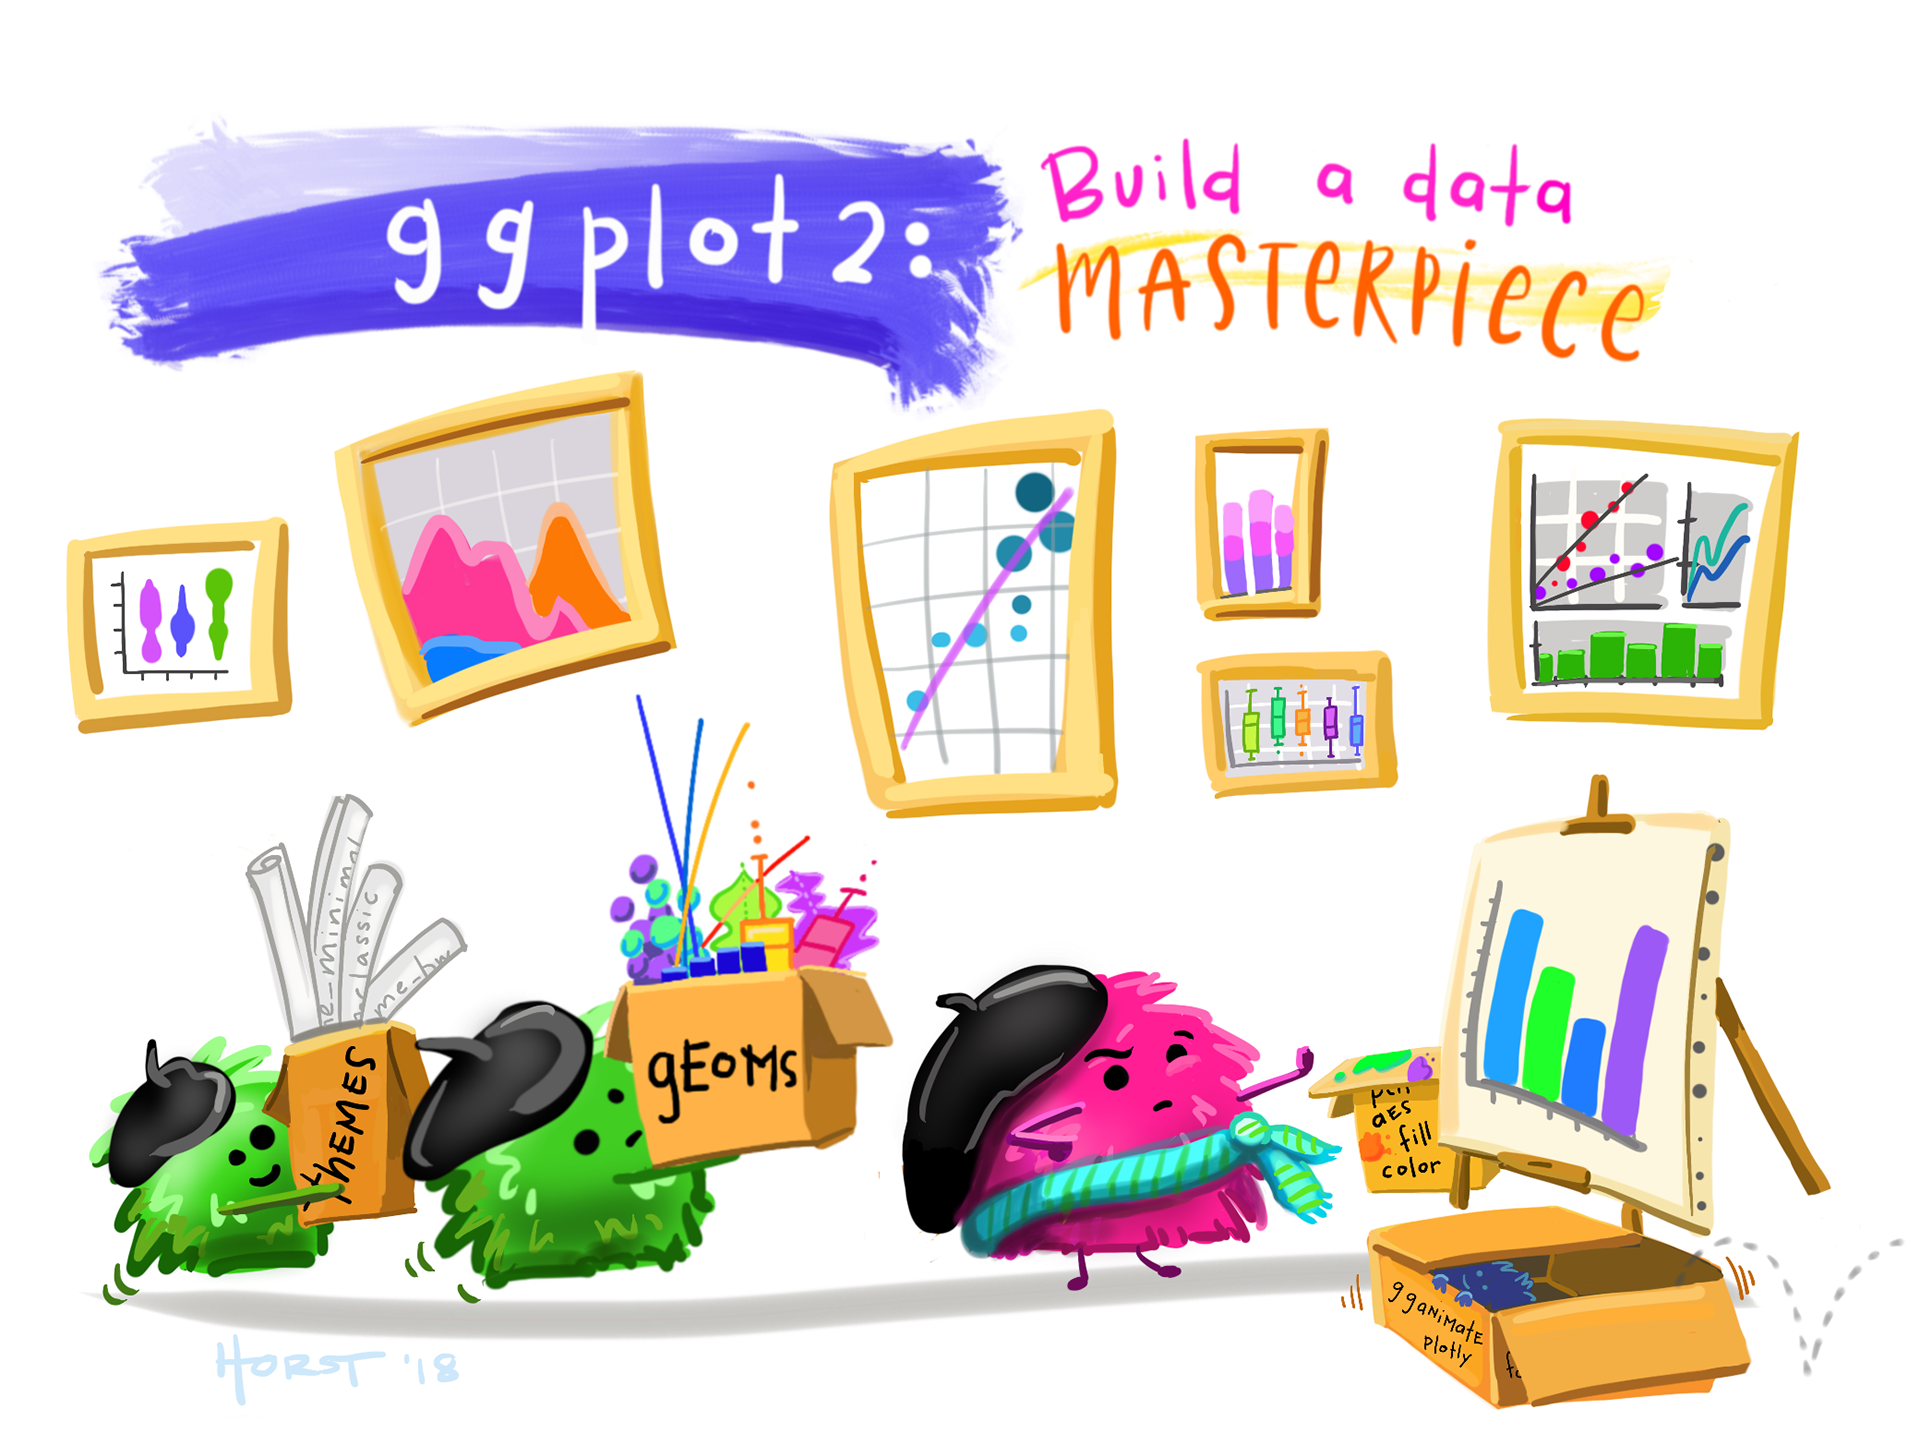 A fuzzy monster in a beret and scarf, critiquing their own column graph on a canvas in front of them while other assistant monsters (also in berets) carry over boxes full of elements that can be used to customize a graph (like themes and geometric shapes). In the background is a wall with framed data visualizations. Stylized text reads 'ggplot2: build a data masterpiece.'